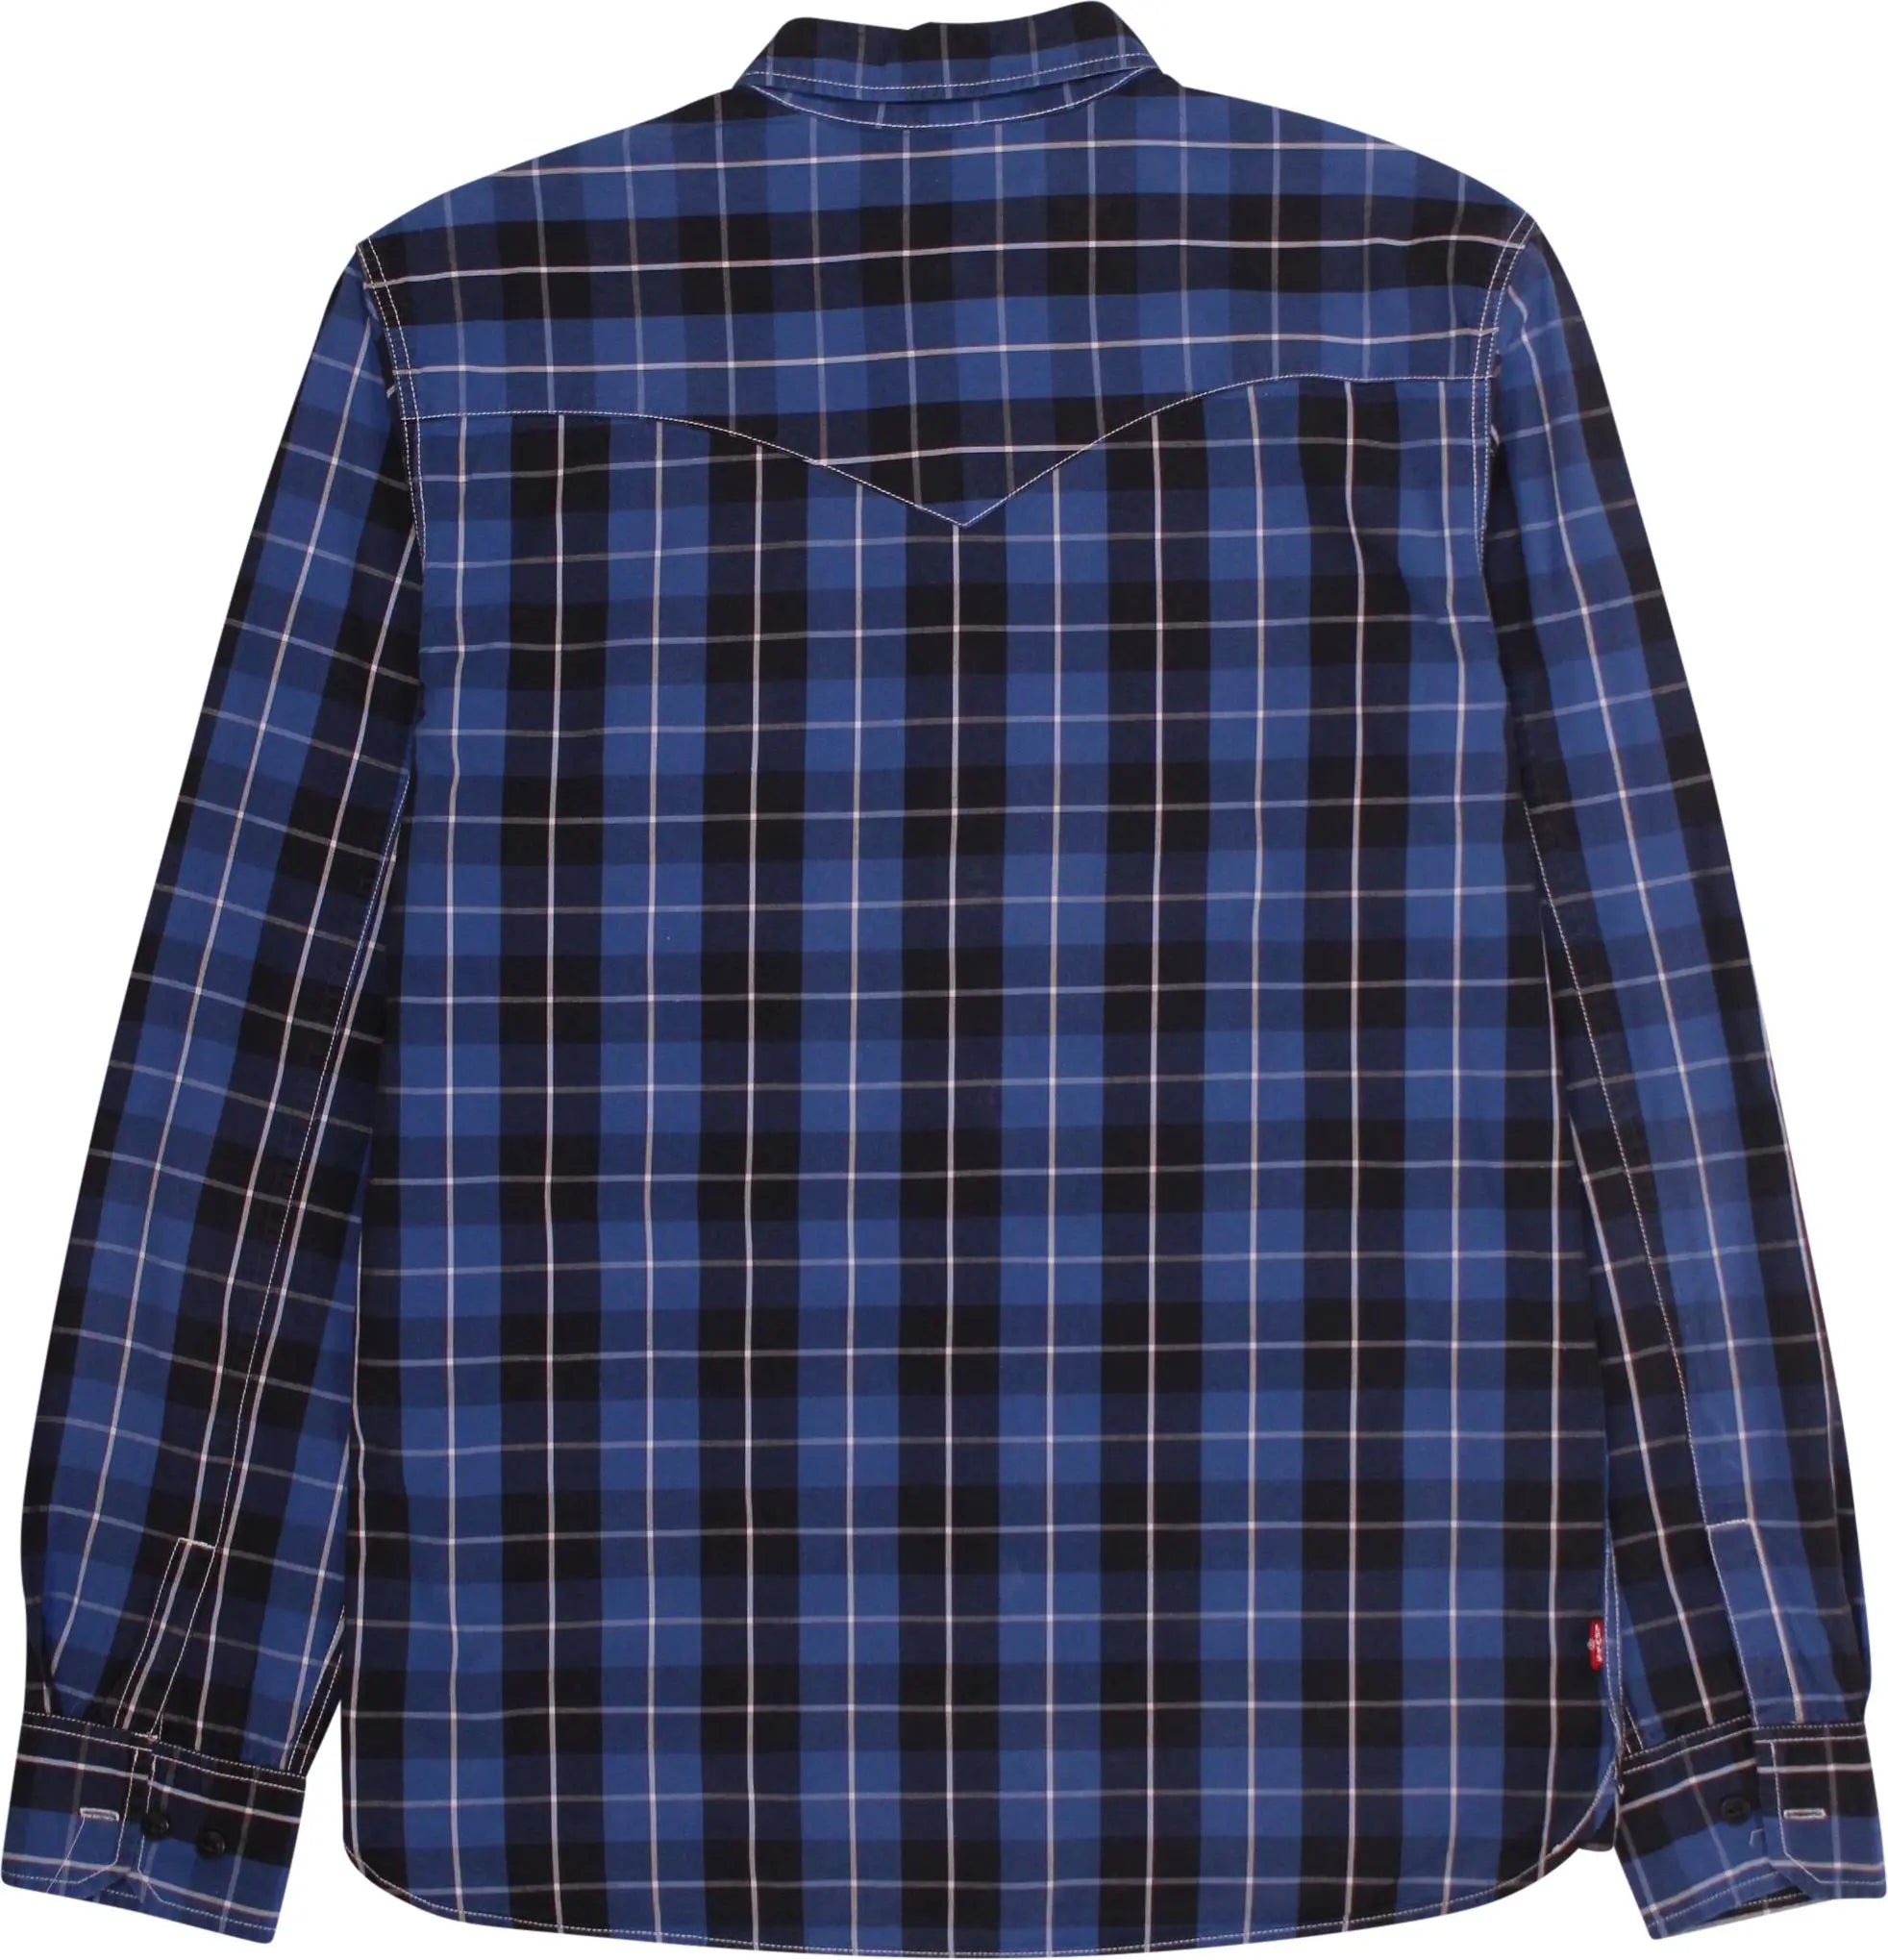 Levi's - Checked Shirt by Levi's- ThriftTale.com - Vintage and second handclothing